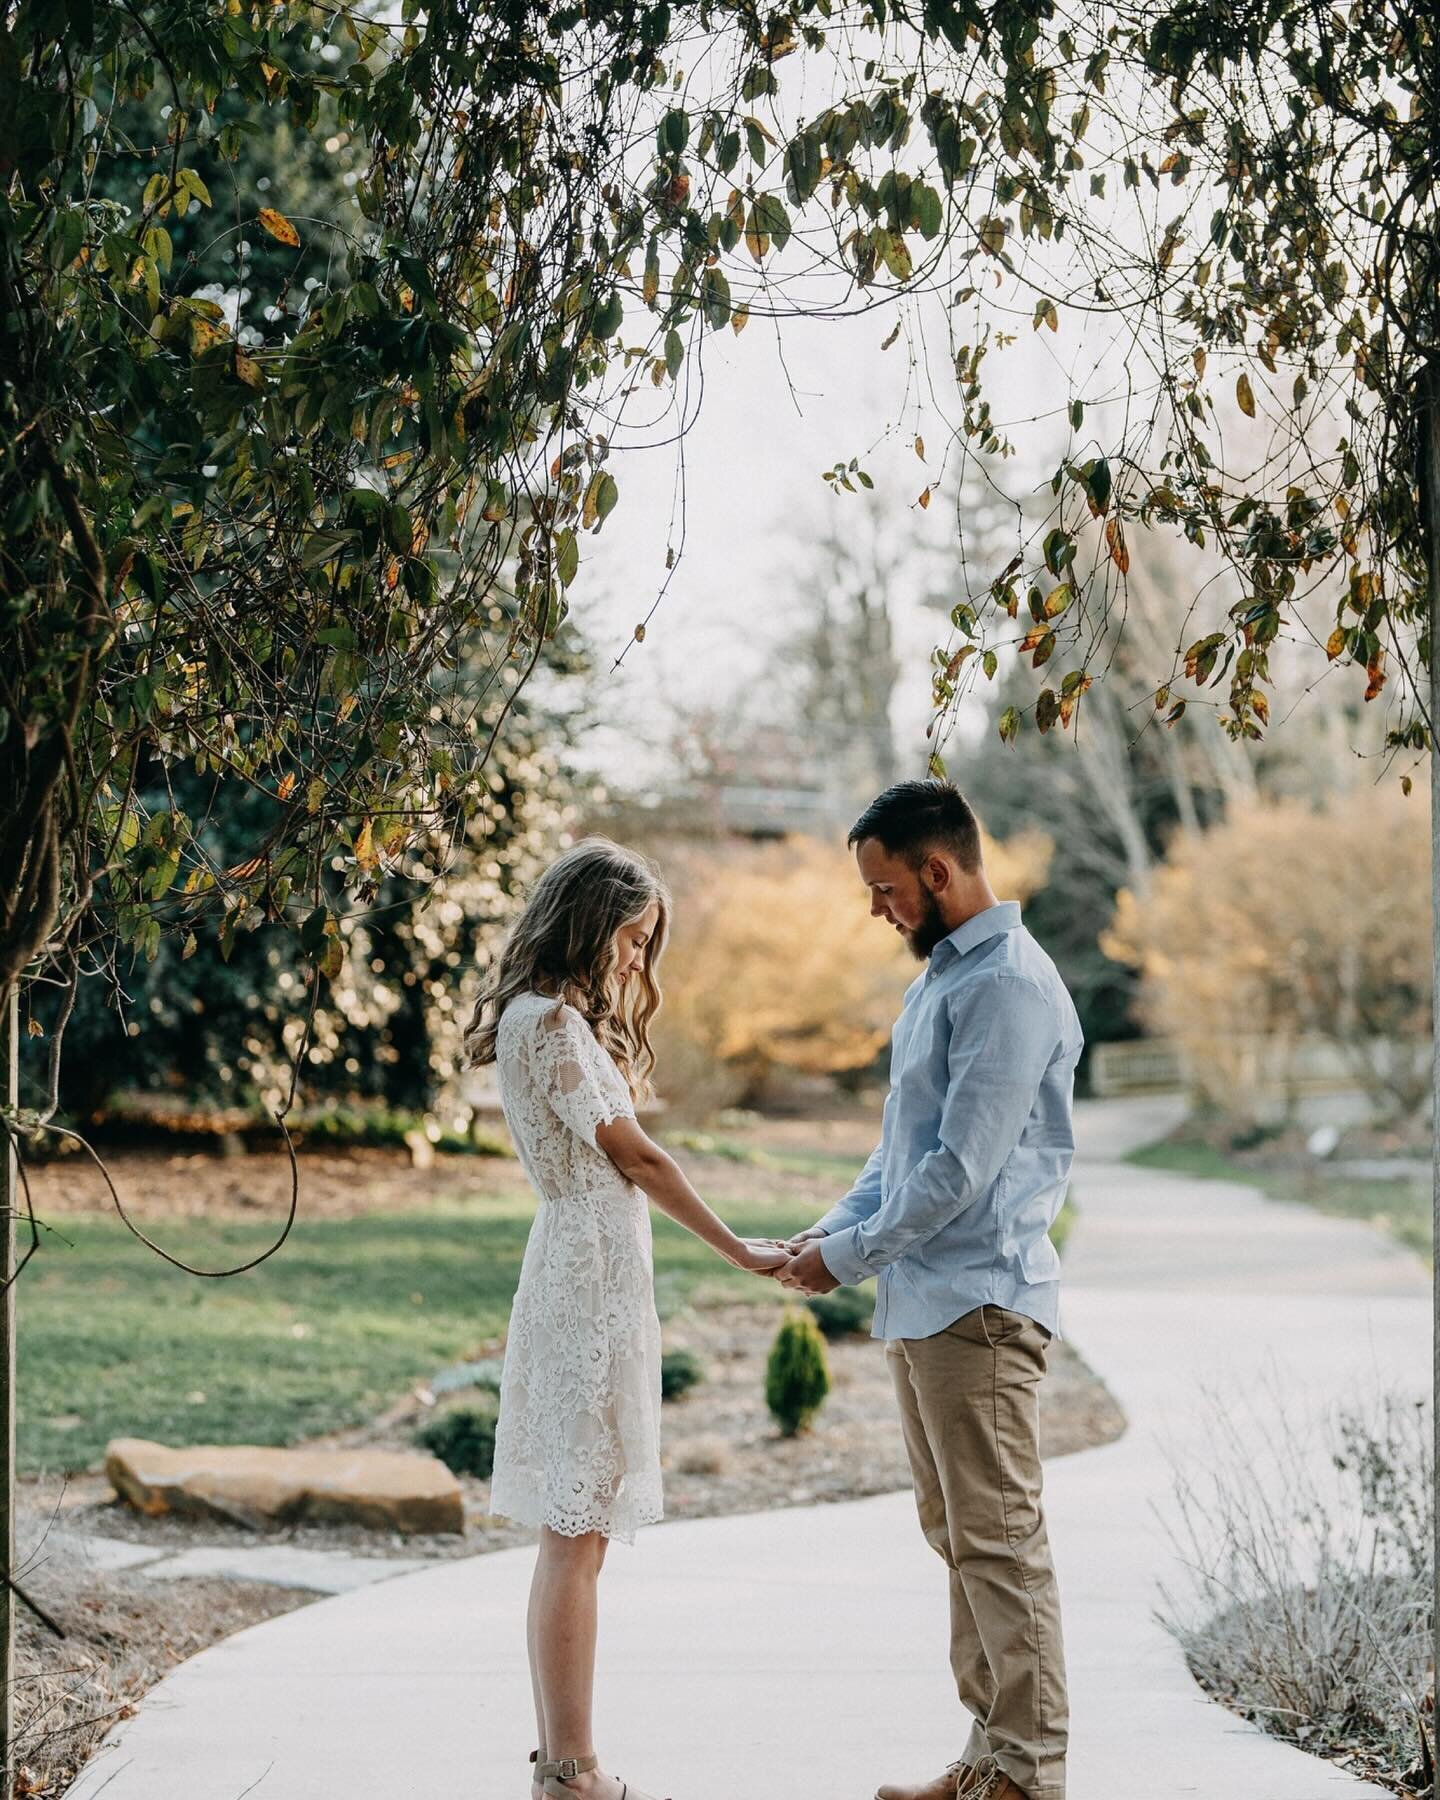 So thankful for this cute couple☺️and to get to capture their love💕. Cold engagement session💨but our hearts were warm🥰. Can&rsquo;t wait to celebrate with them!📸
.
.
.
.
.
.
.
.
#brides #charlottewedding #CharlotteWeddingPhotographers #ashevillew